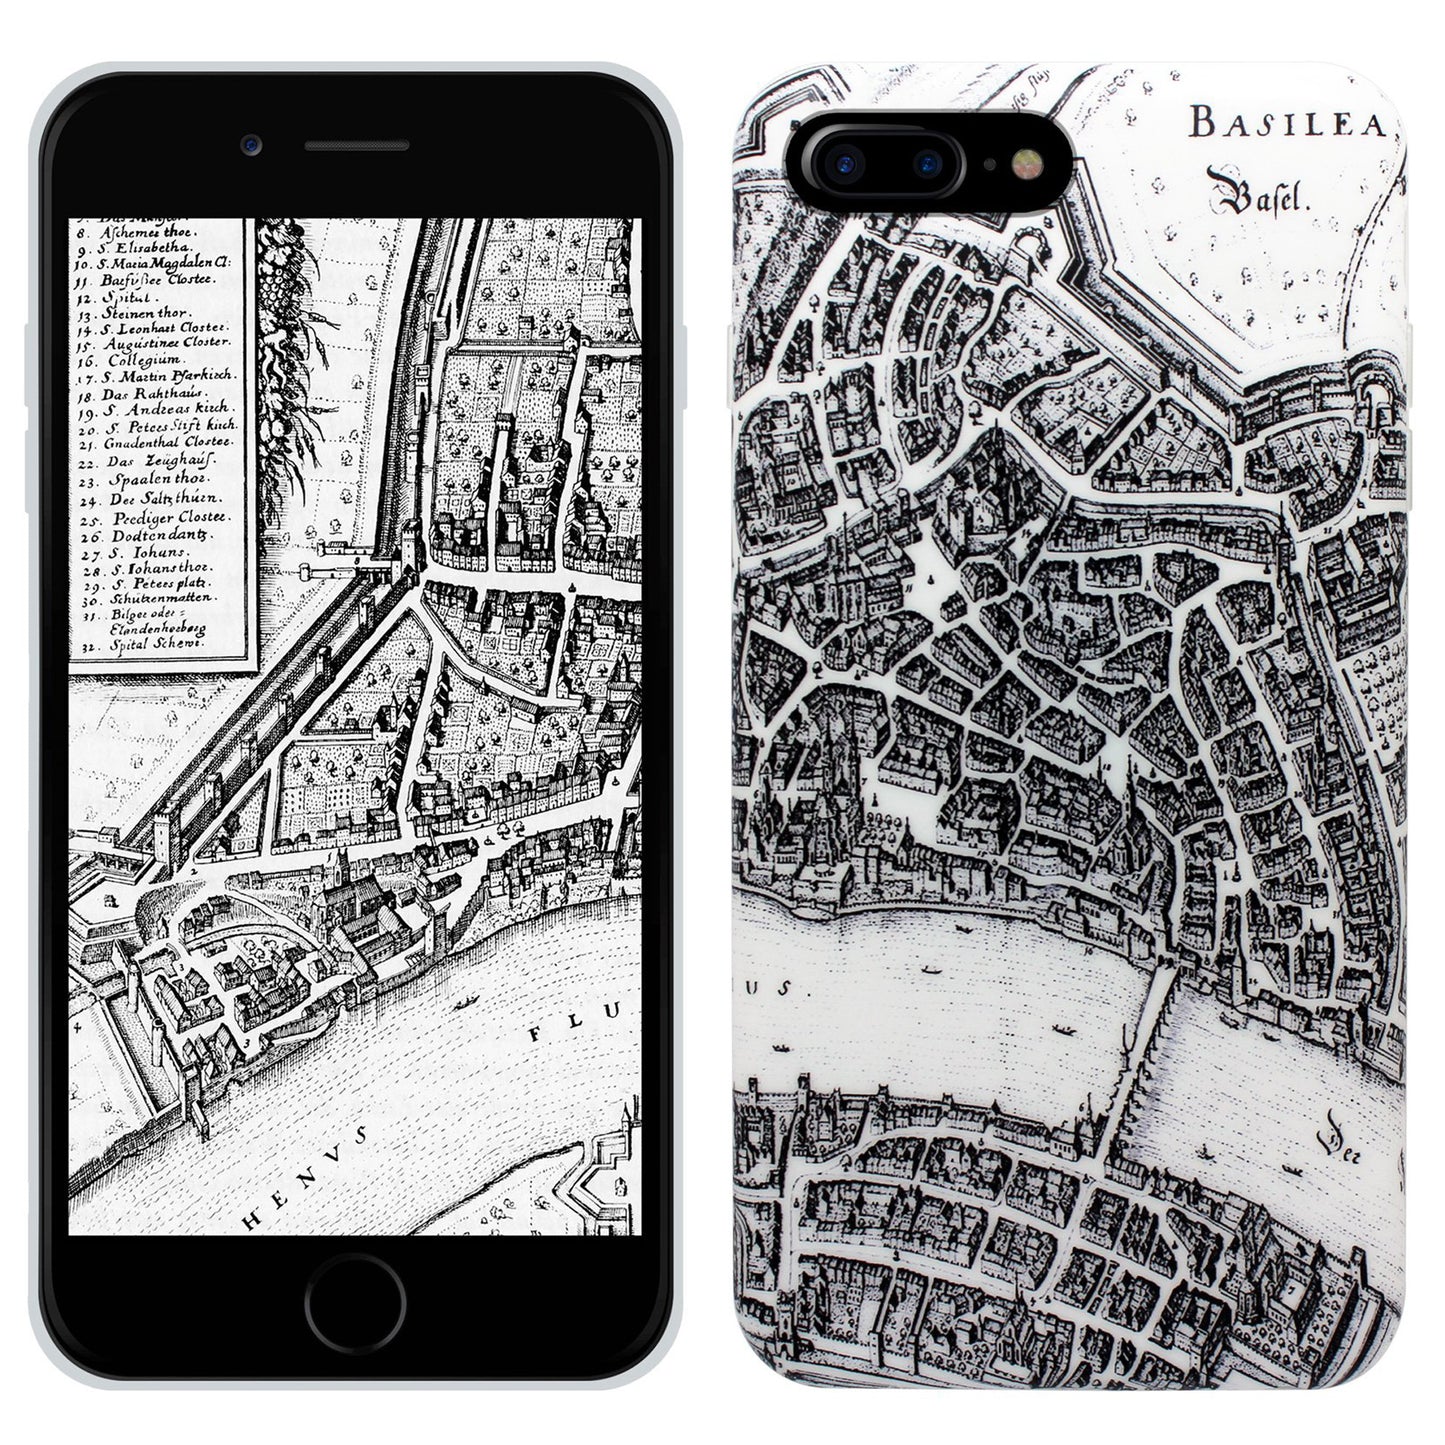 Basel Merian 360° Case for iPhone 6/6S/7/8 Plus